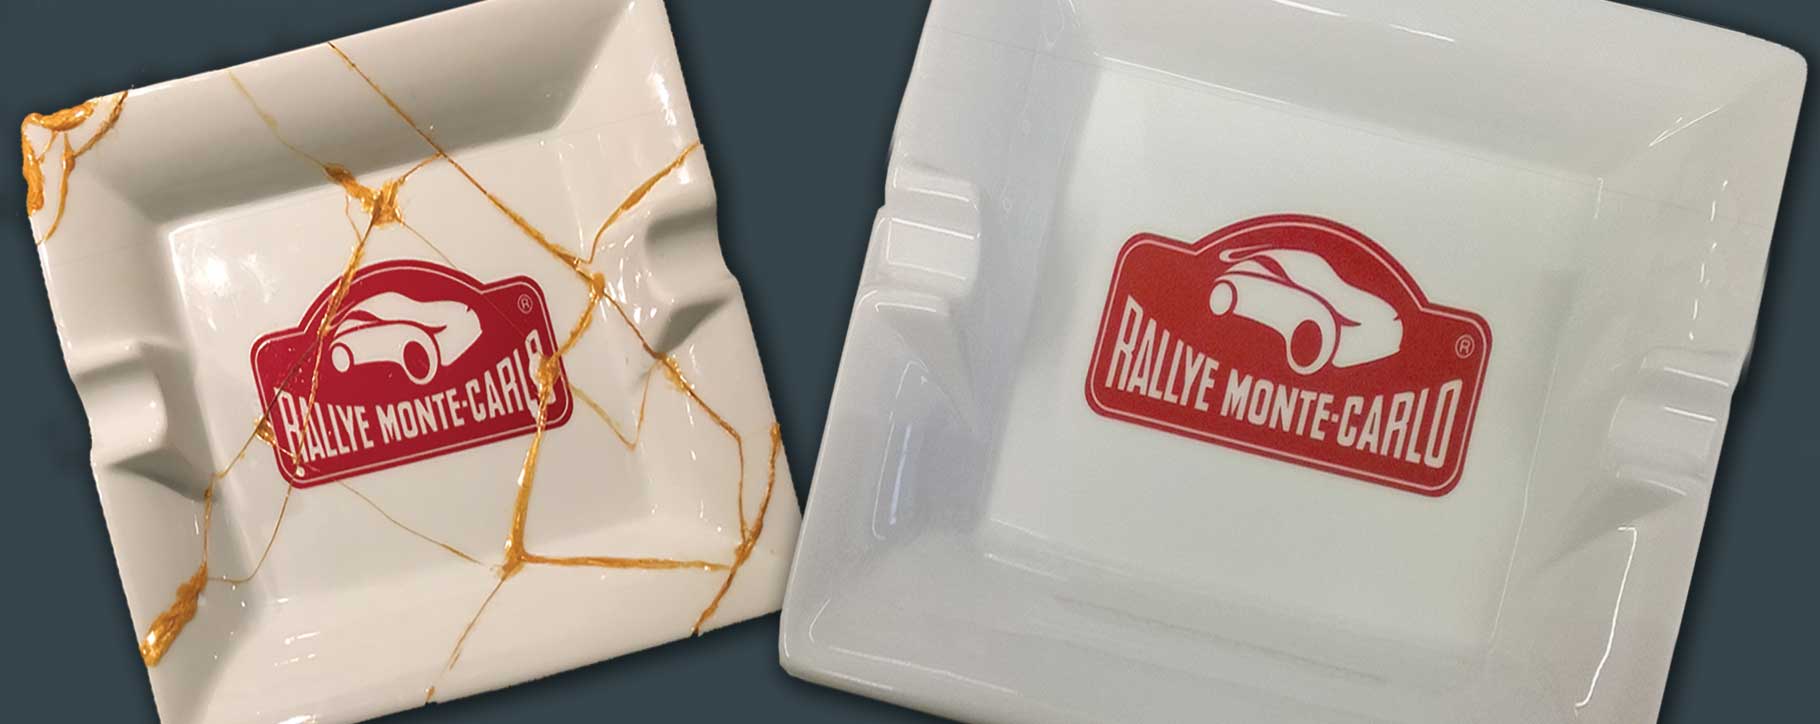 Rallye Monte Carlo ceramic ashtray before and after restoration following a breakage